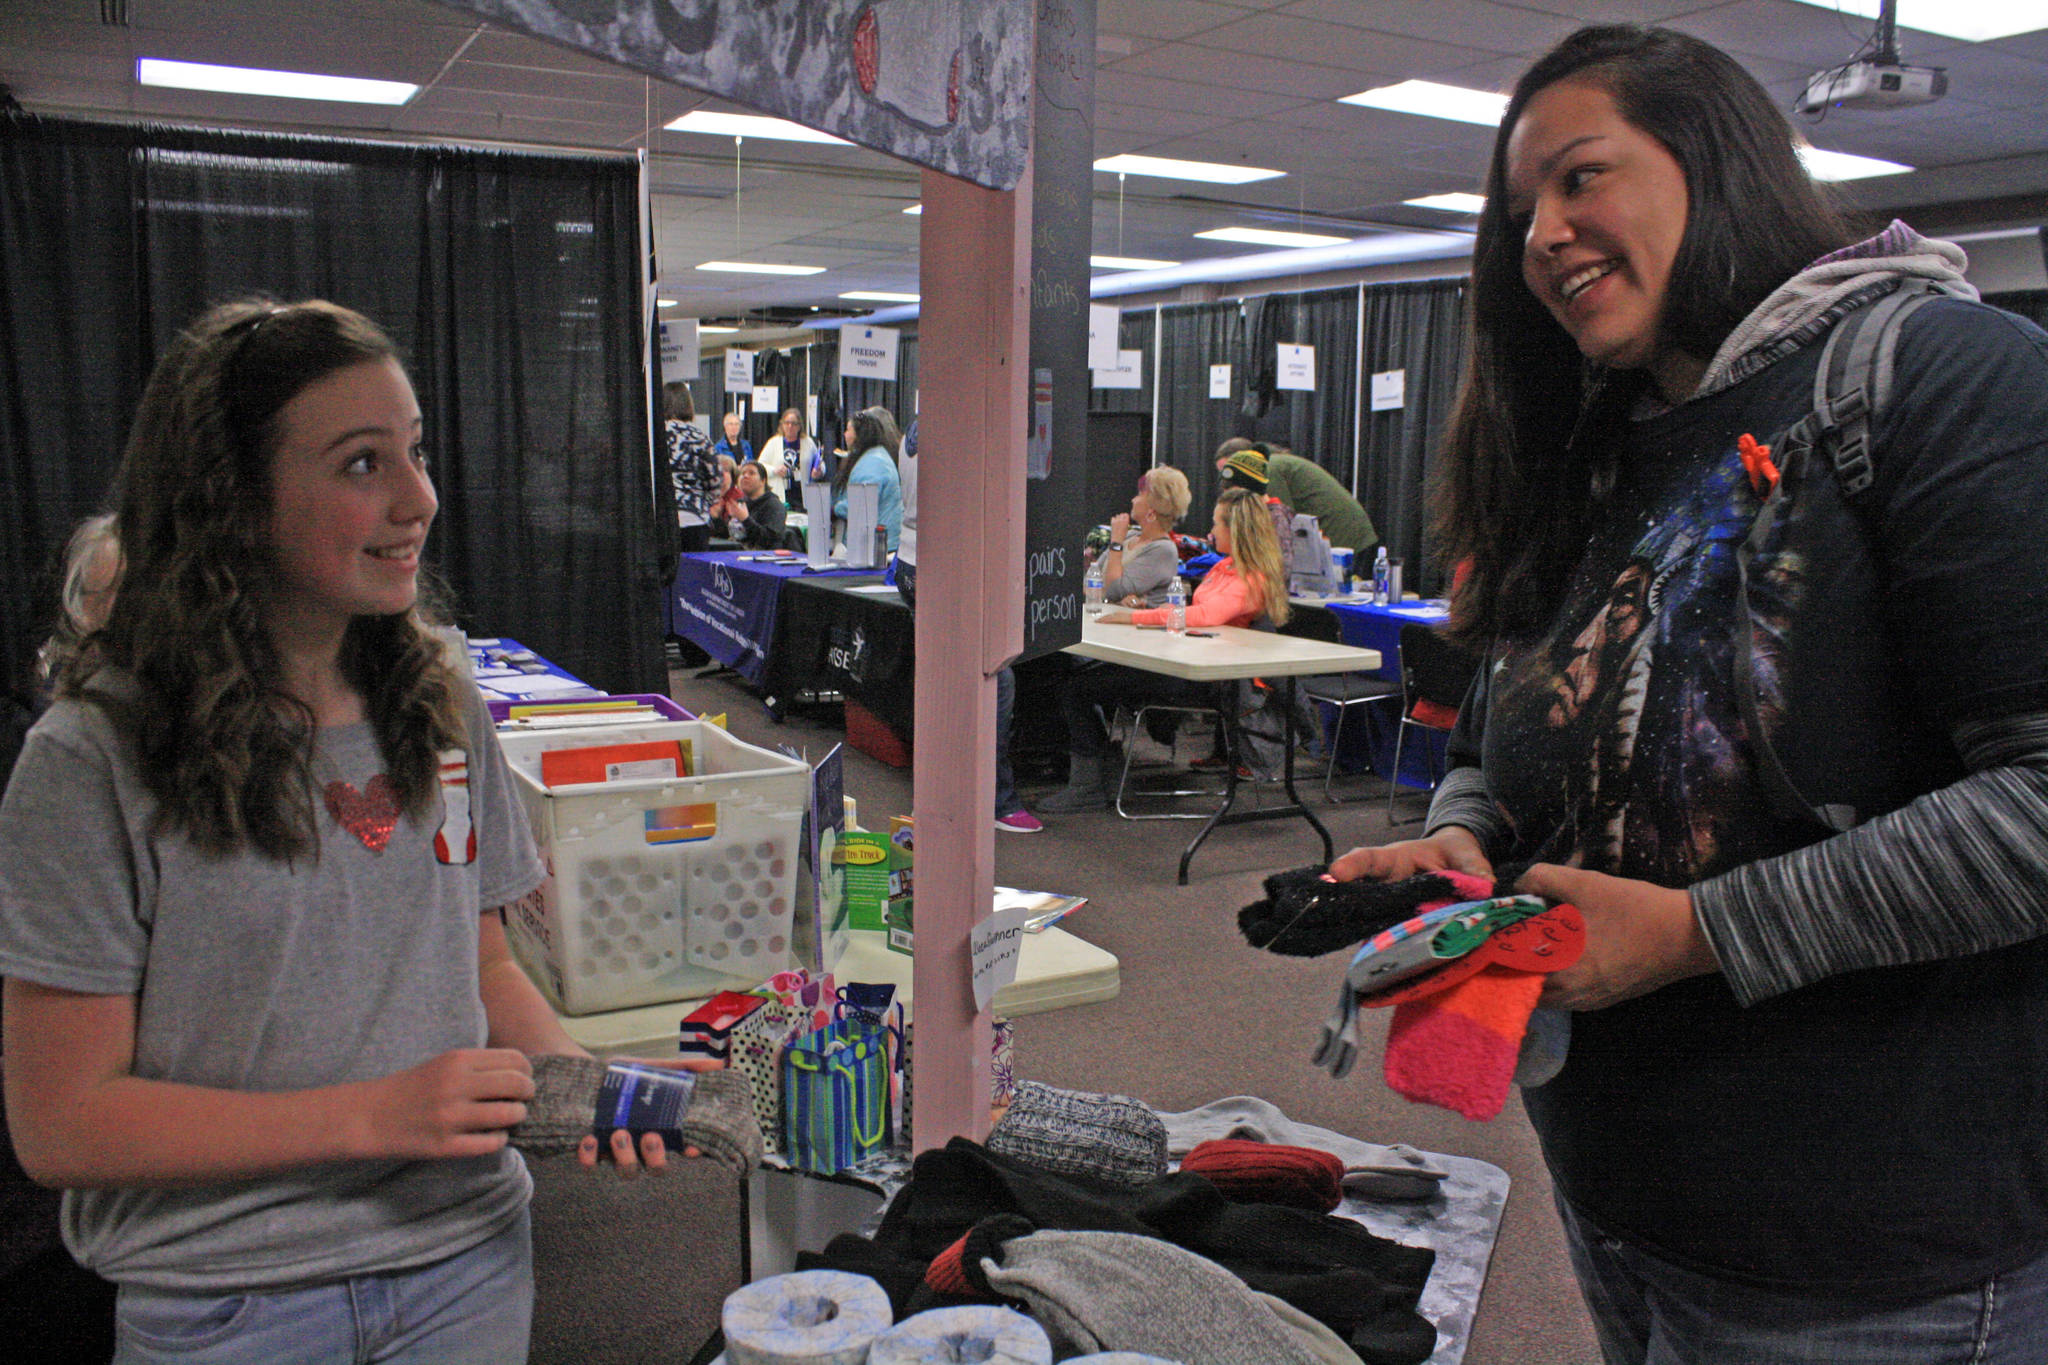 Aleea Faulkner, 12, shares socks with mom Wausaumoutouikwe Sandman-Shelifoe on Wednesday, Jan. 24 during Project Homeless Connect at the Soldotna Sports Complex. Faulkner spearheaded a sock drive to support the annual community service event. (Photo by Erin Thompson/Peninsula Clarion)